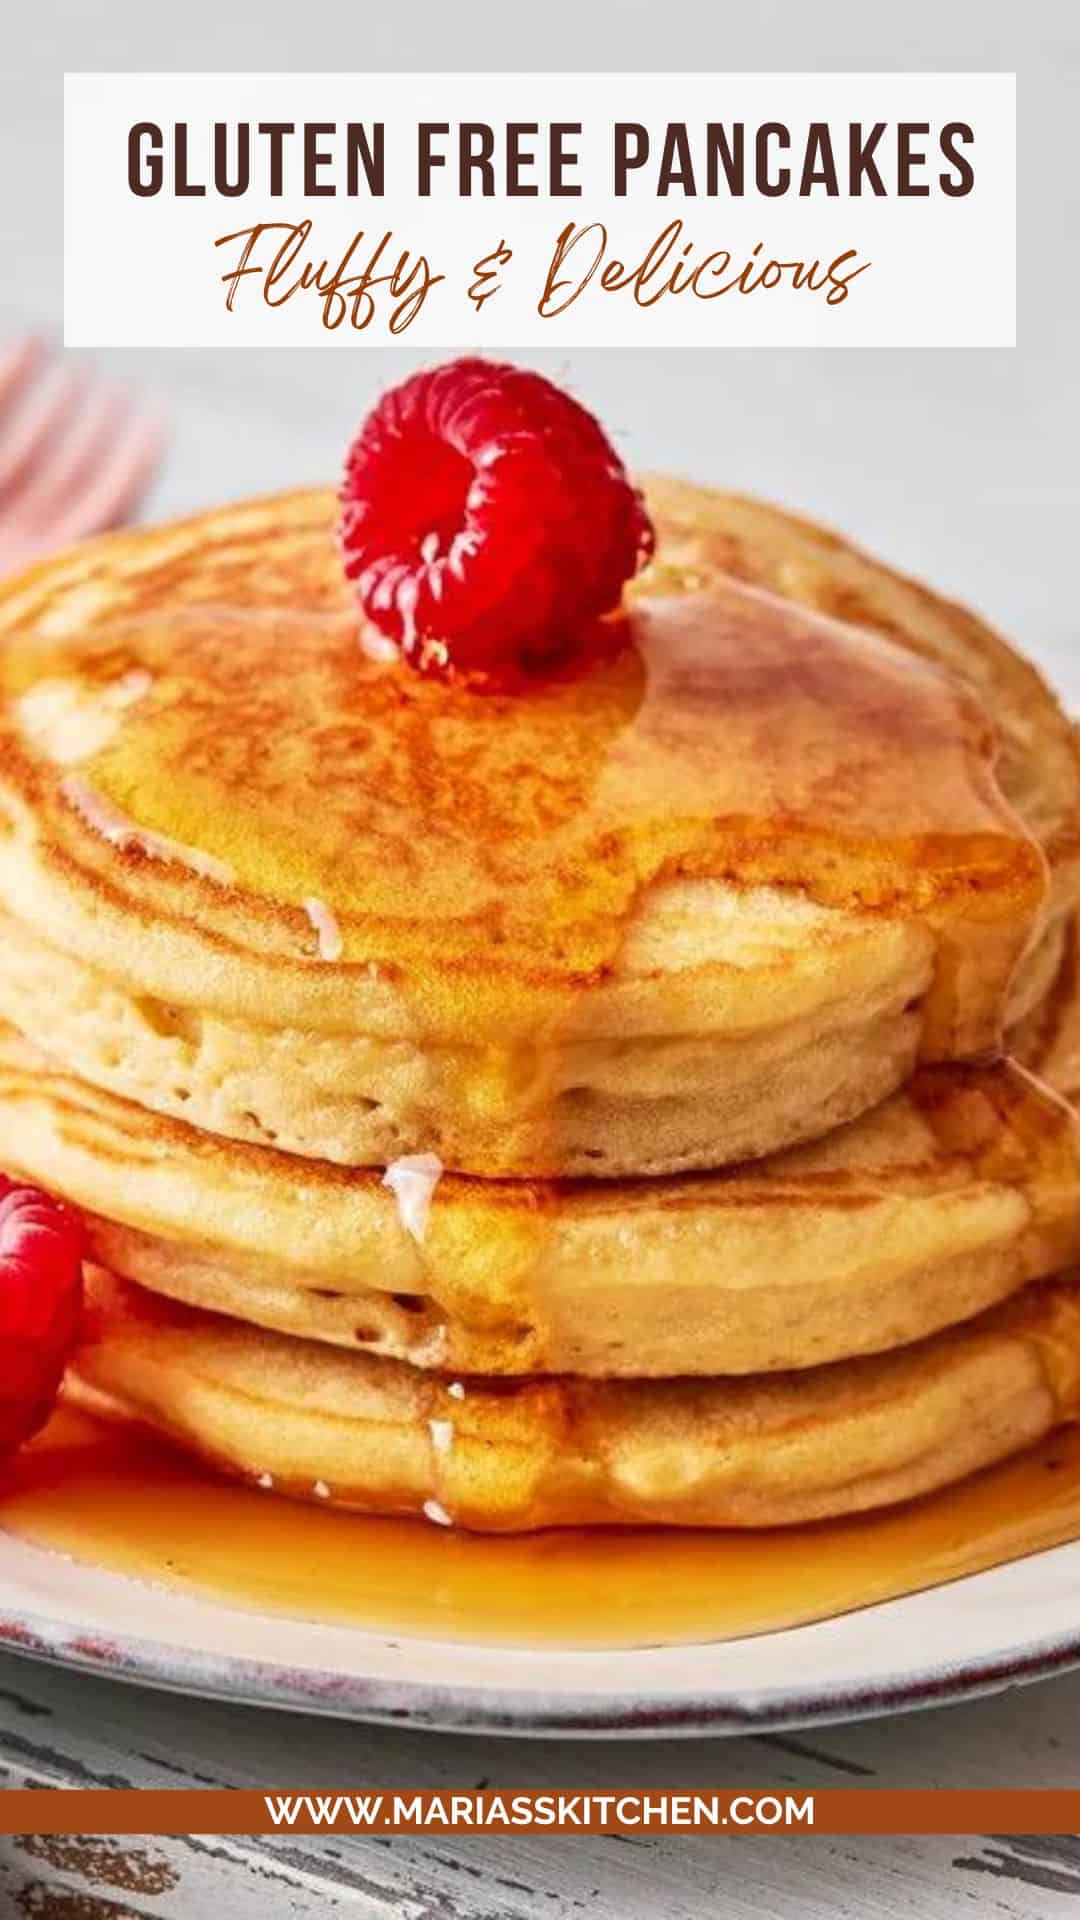 How to Make Gluten Free Pancakes from Scratch